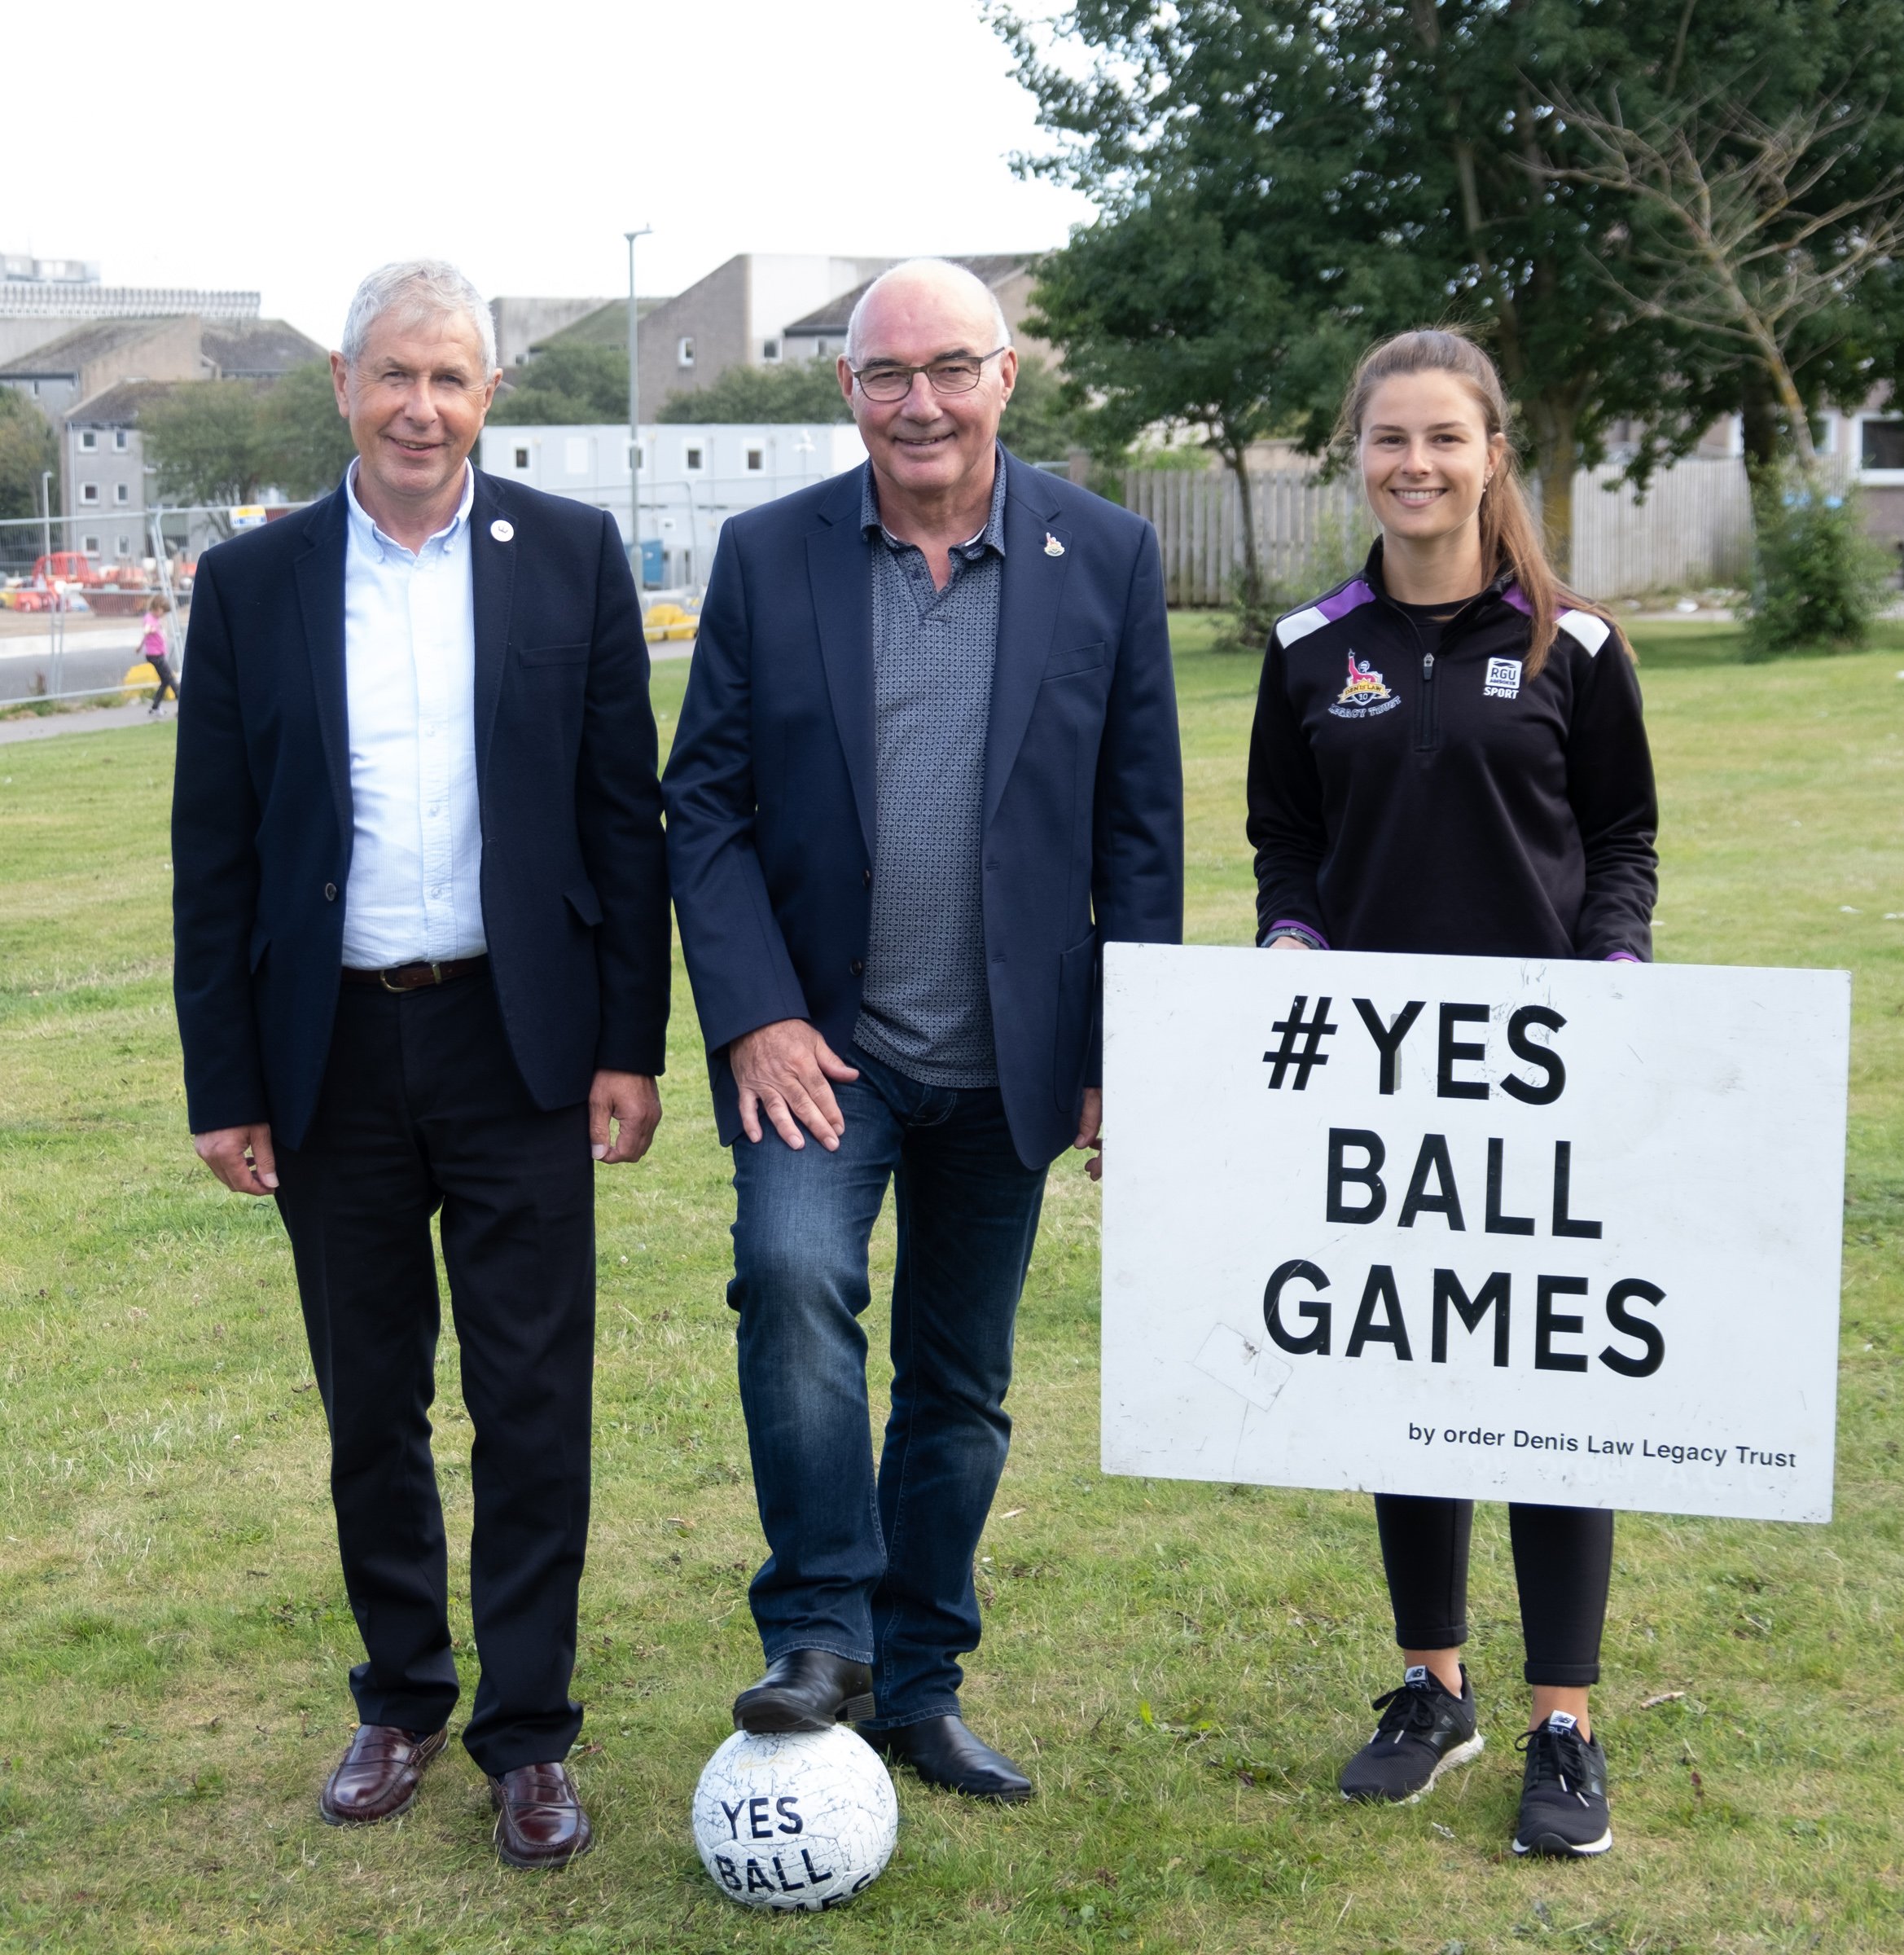 David Suttie, Trustee, Denis Law Legacy Trust; Willie Miller; Kiana Coutts, Streetsport Outreach Officer, Denis Law Legacy Trust